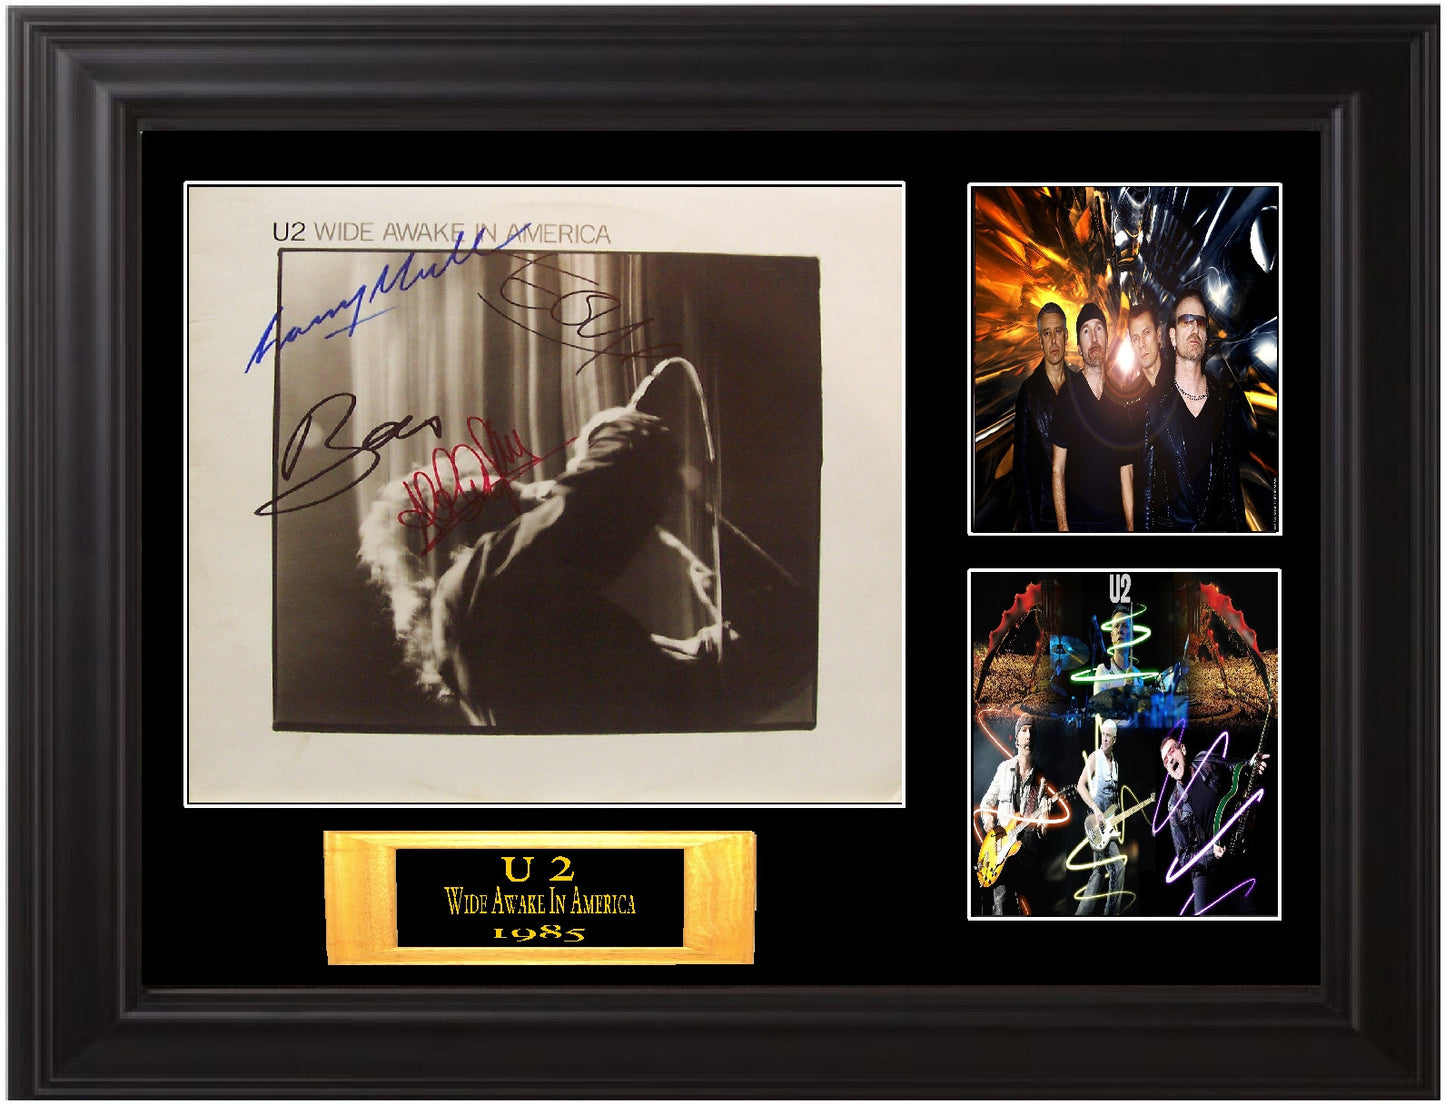 U 2 Autographed Lp "Wide Awake in America" - Zion Graphic Collectibles